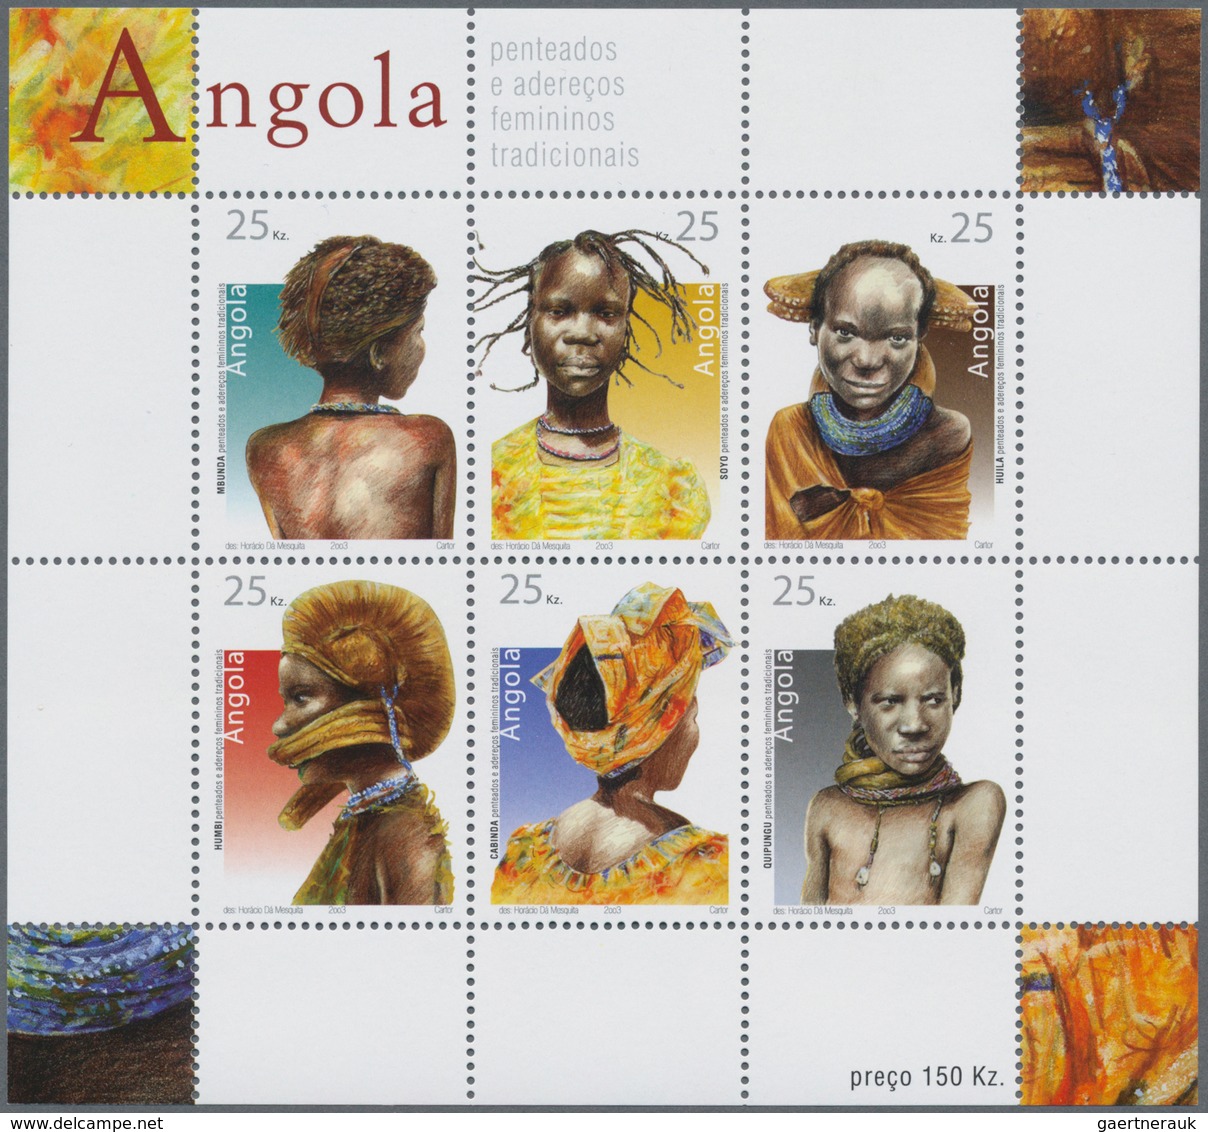 Angola: 2003, "TRADITIONAL WOMEN'S HAIRSTYLE" Miniature Sheet, Investment Lot Of 500 Copies Mint Nev - Angola